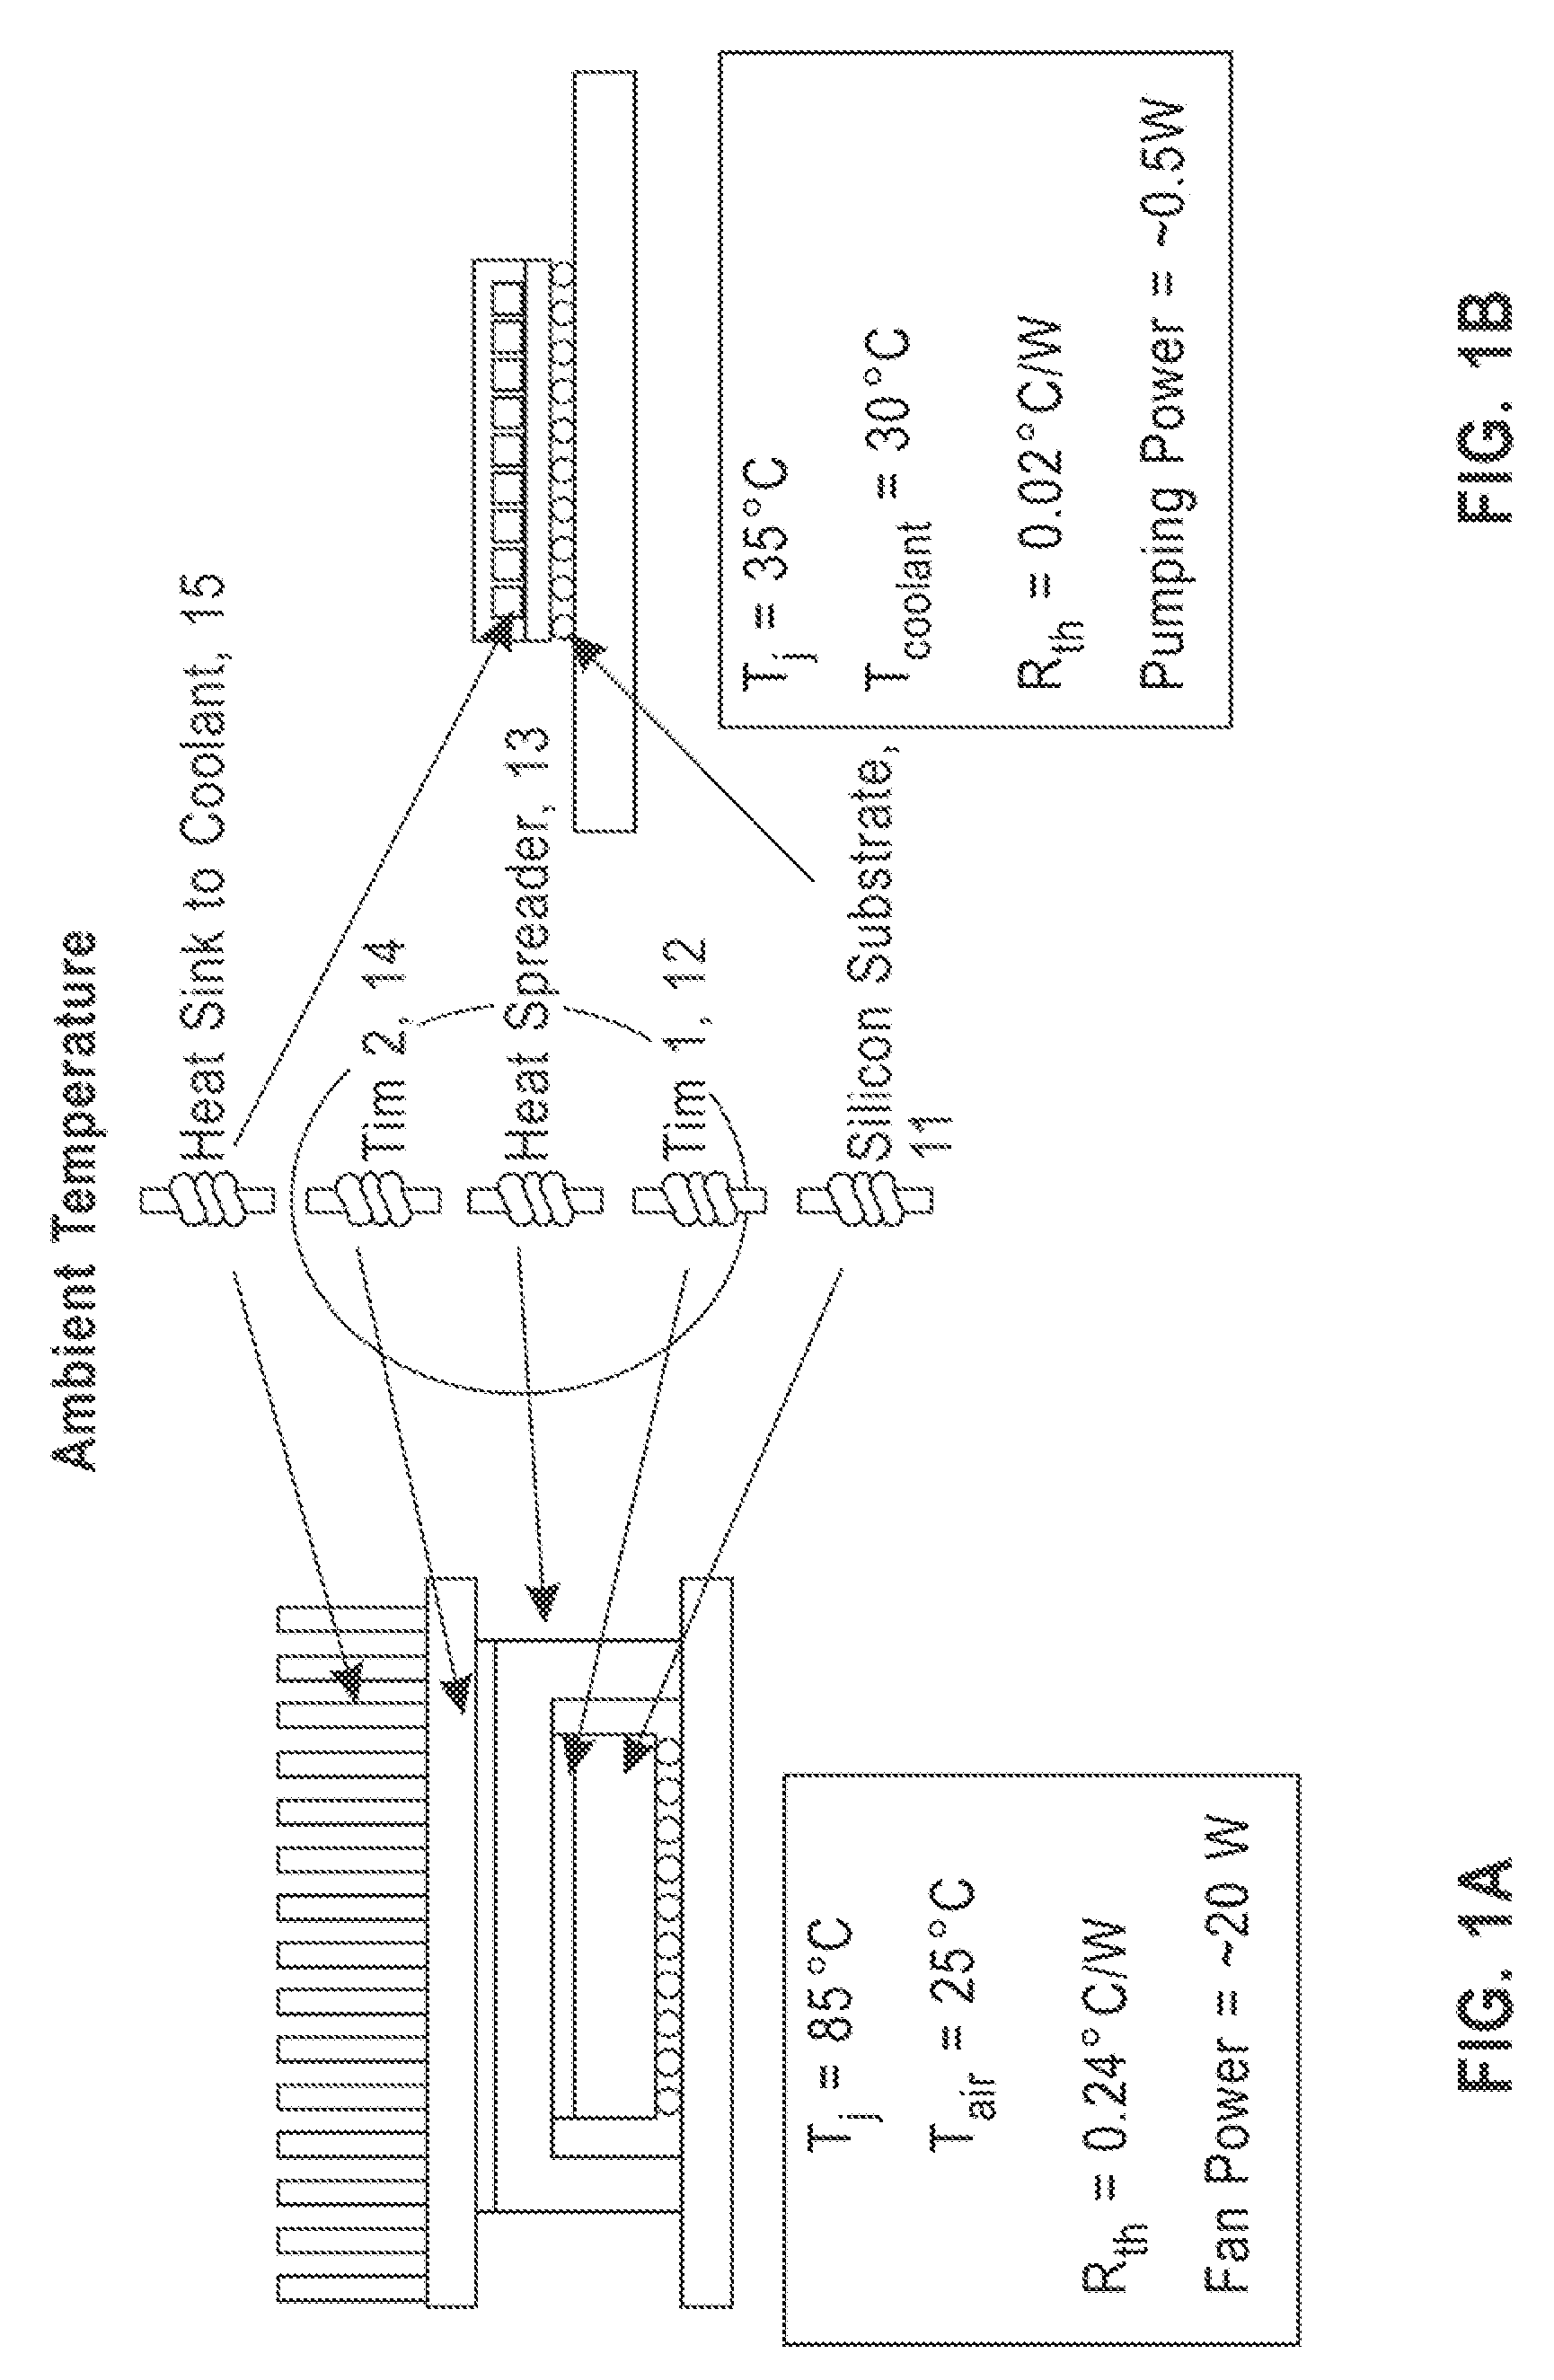 Two-phase cooling with ambient cooled condensor